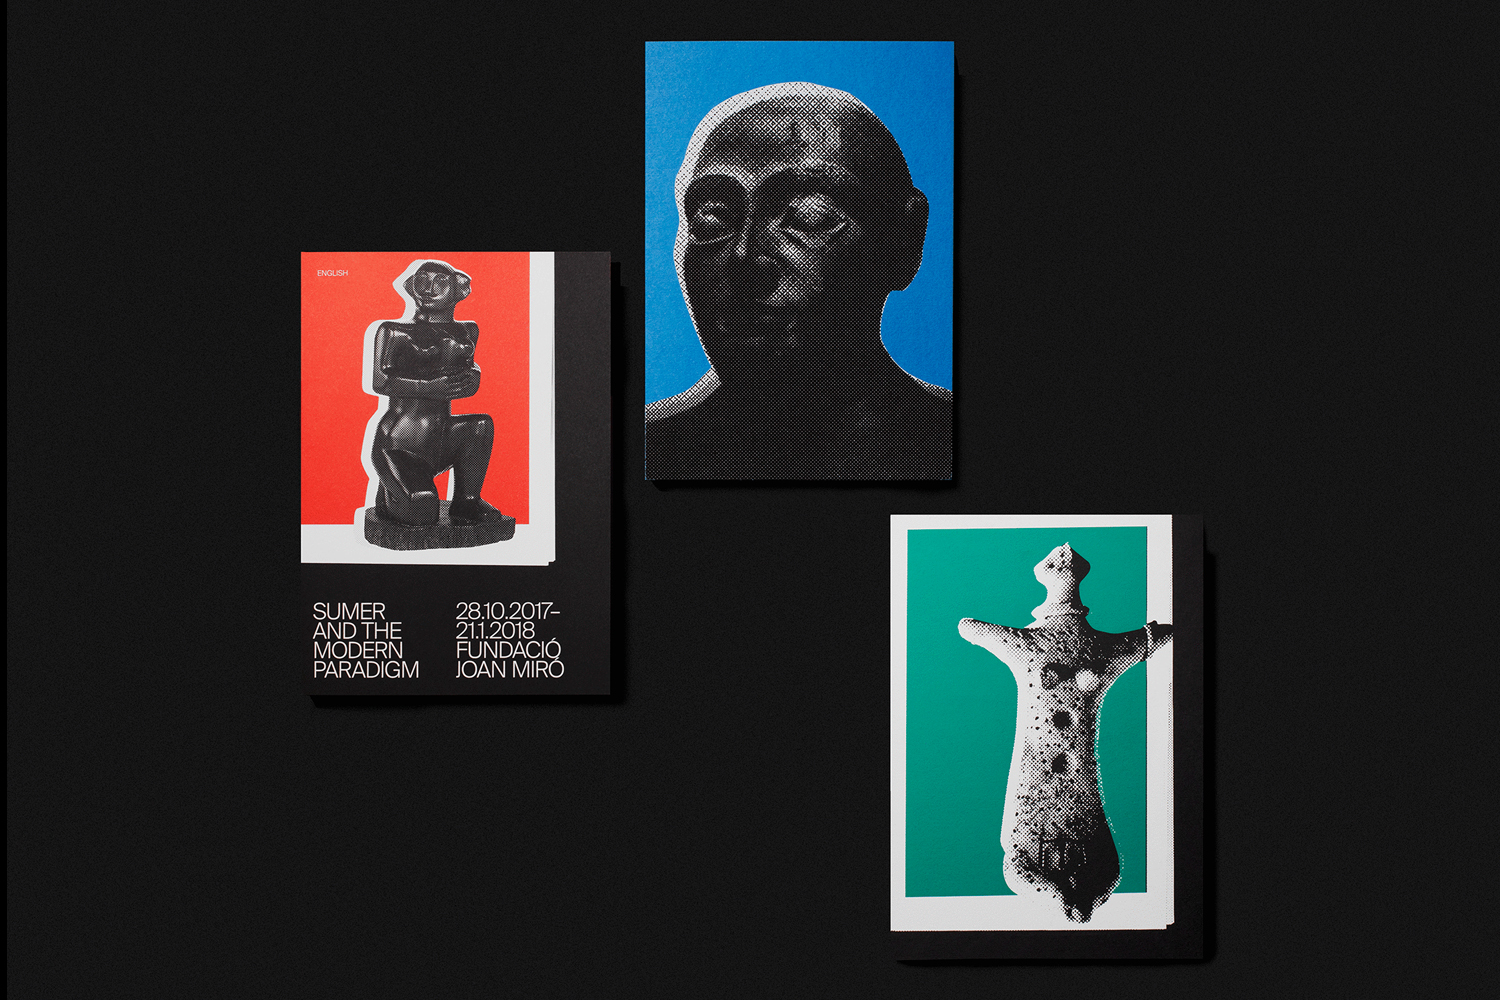 Art Gallery Logos & Exhibition Branding – Sumer And The Modern Paradigm by Clase bcn, Spain